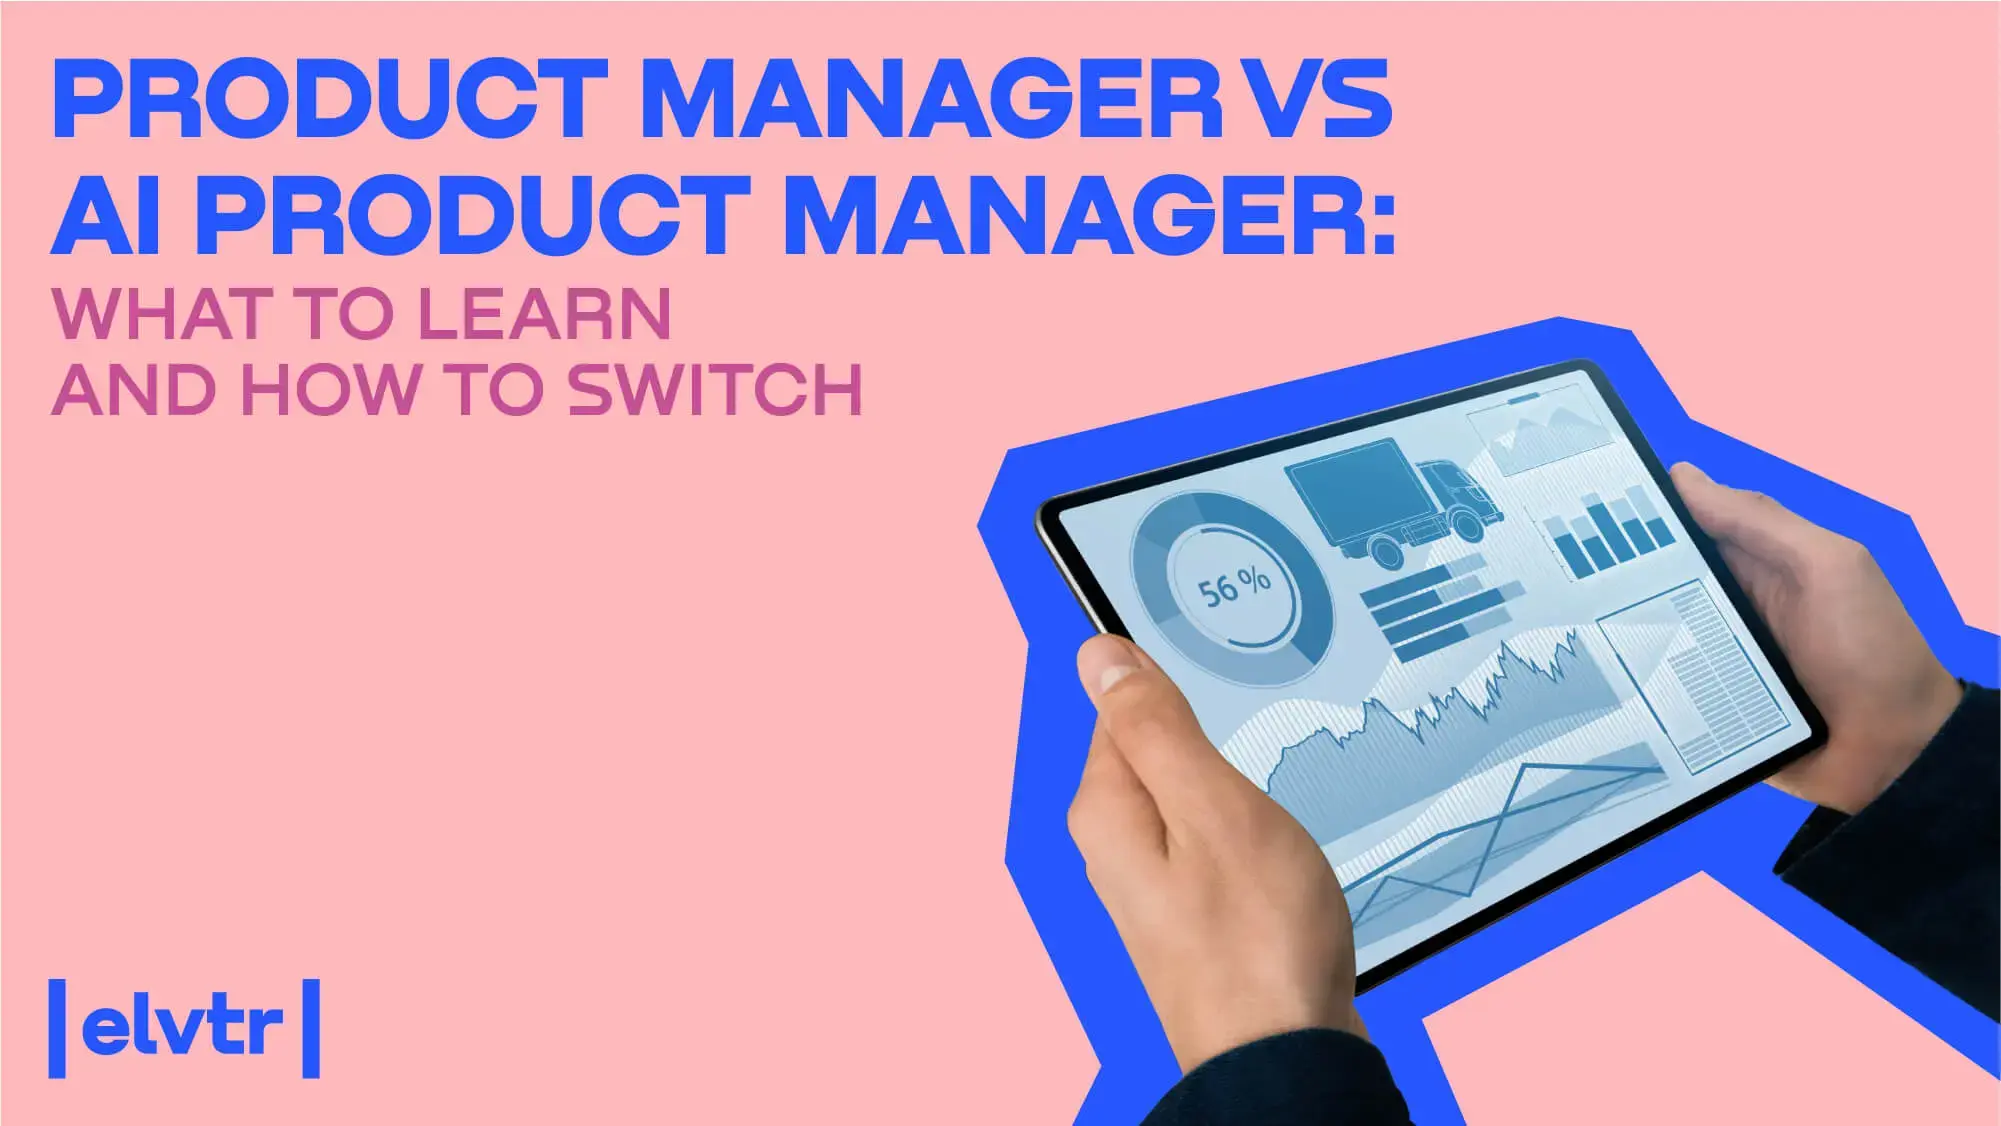 PRODUCT MANAGER VS AI PRODUCT MANAGER: WHAT TO LEARN AND HOW TO SWITCH image